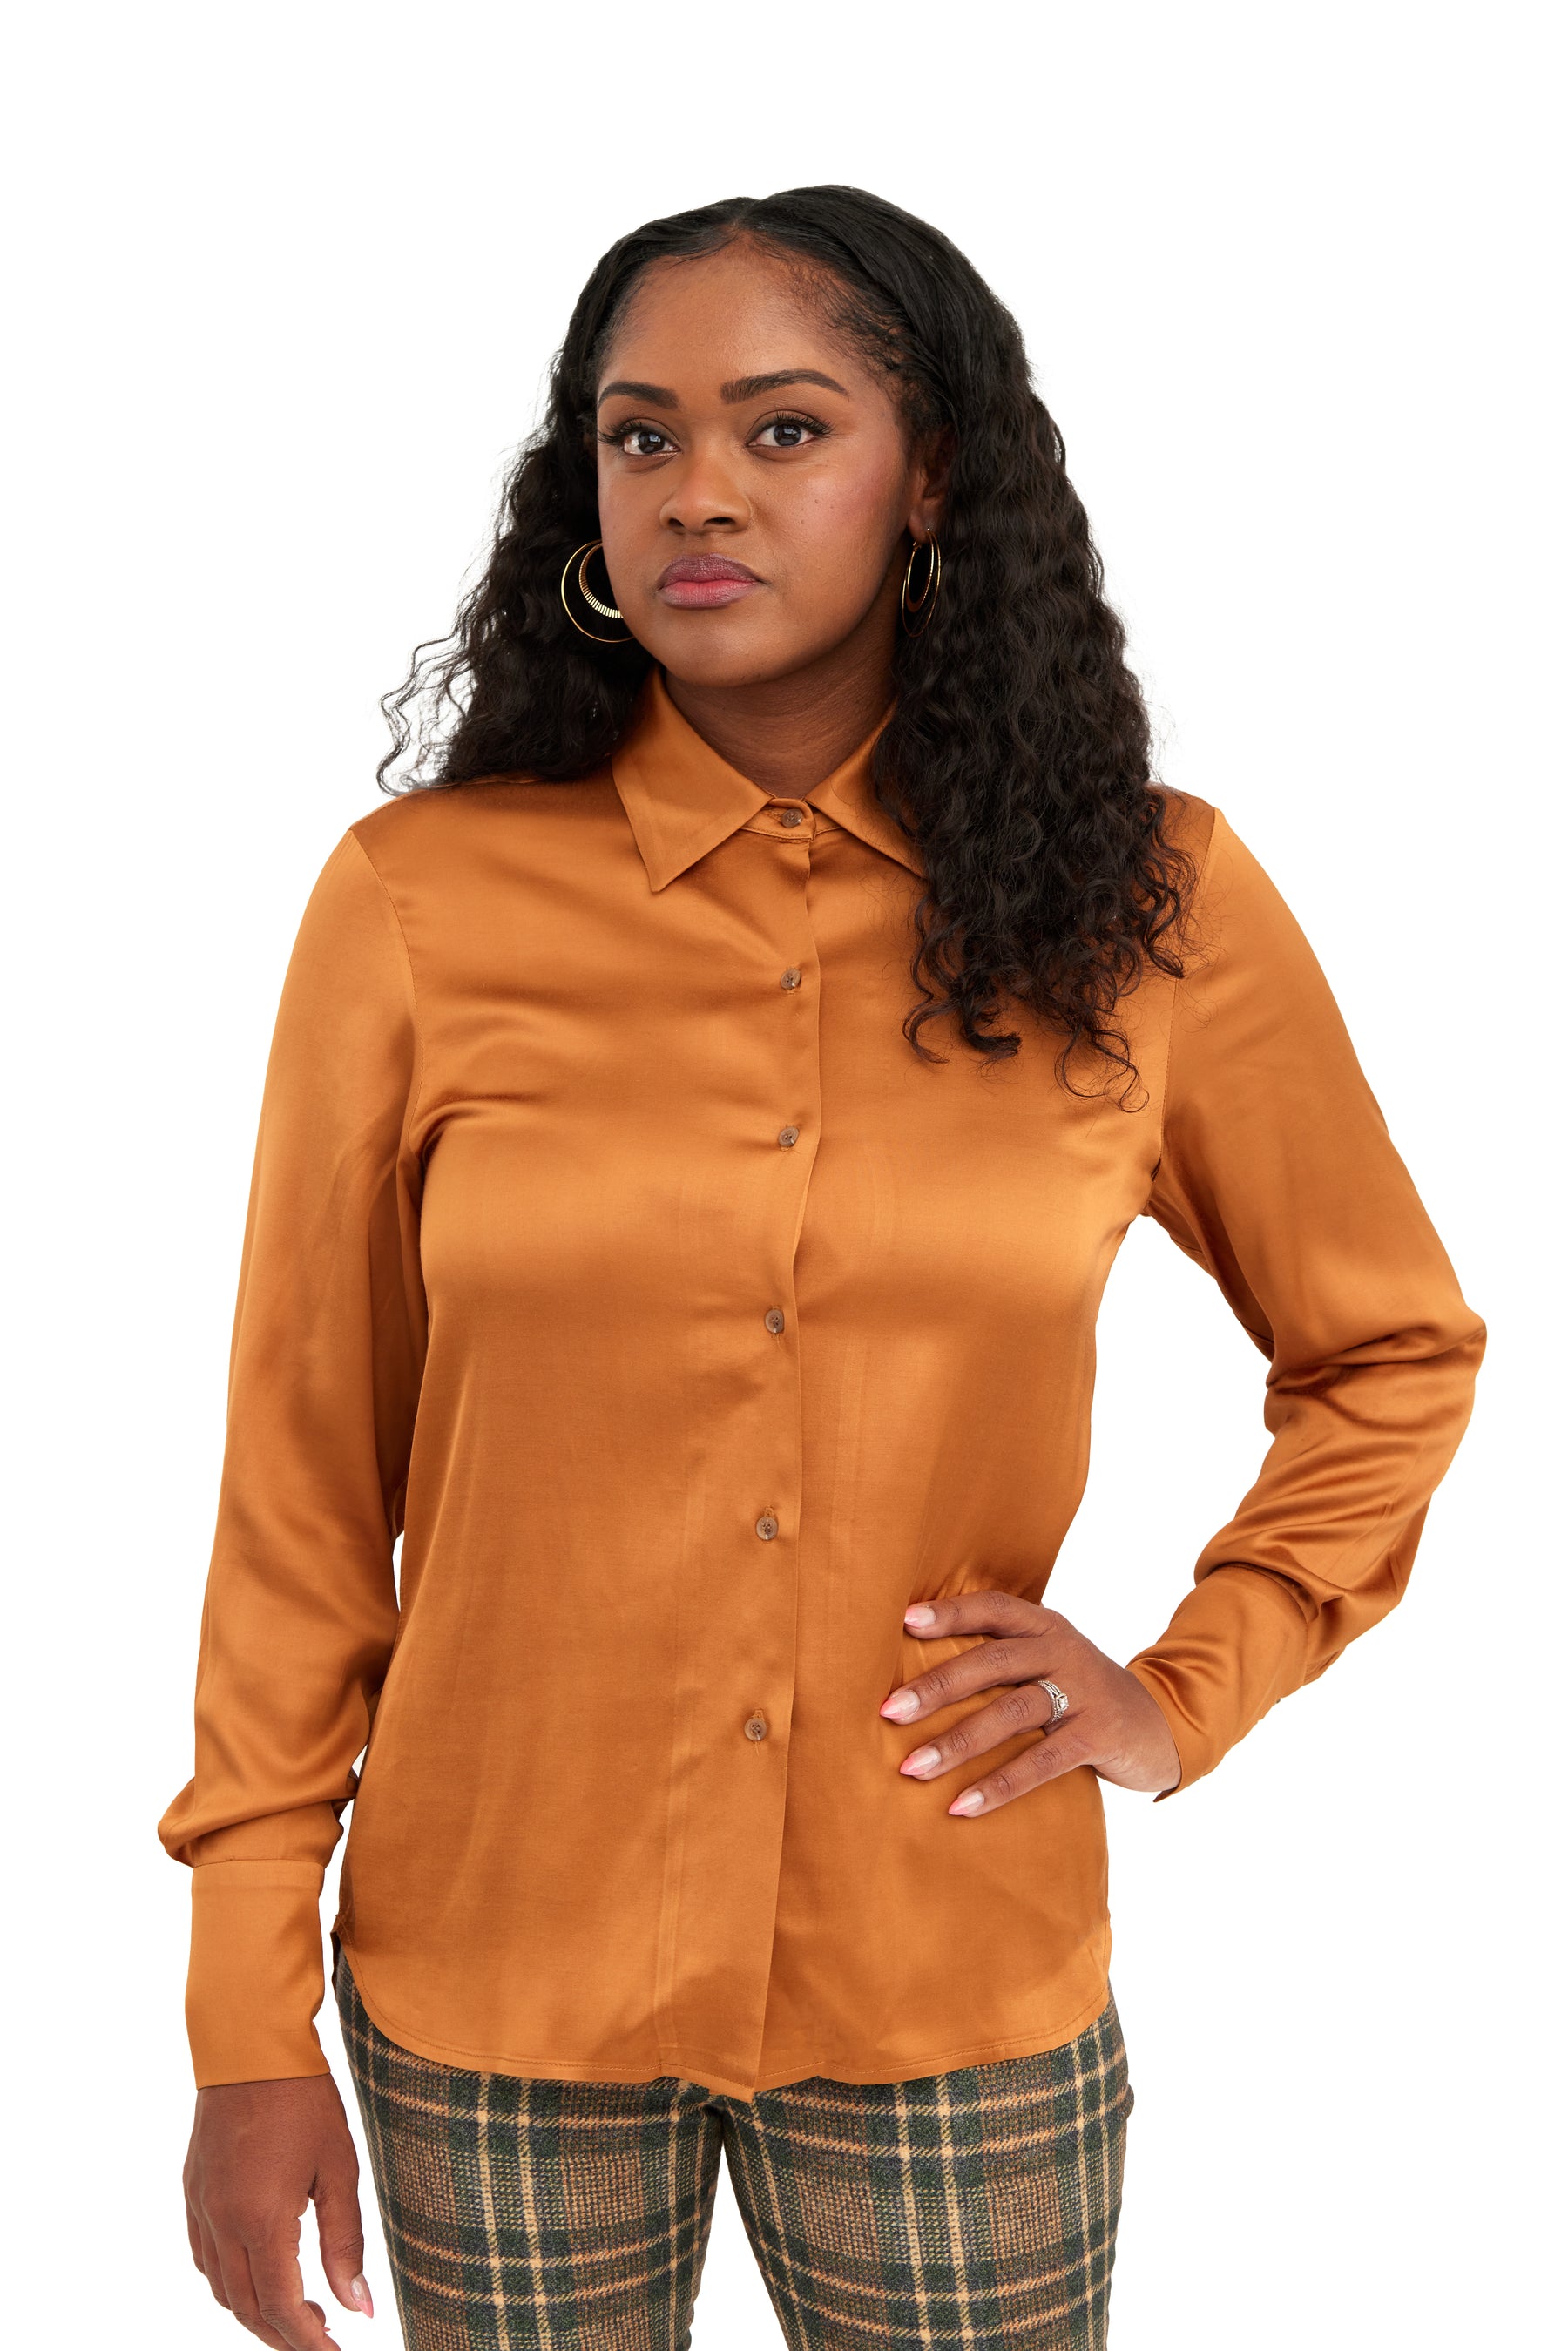 The Knox Blouse in Viscose Charmeuse